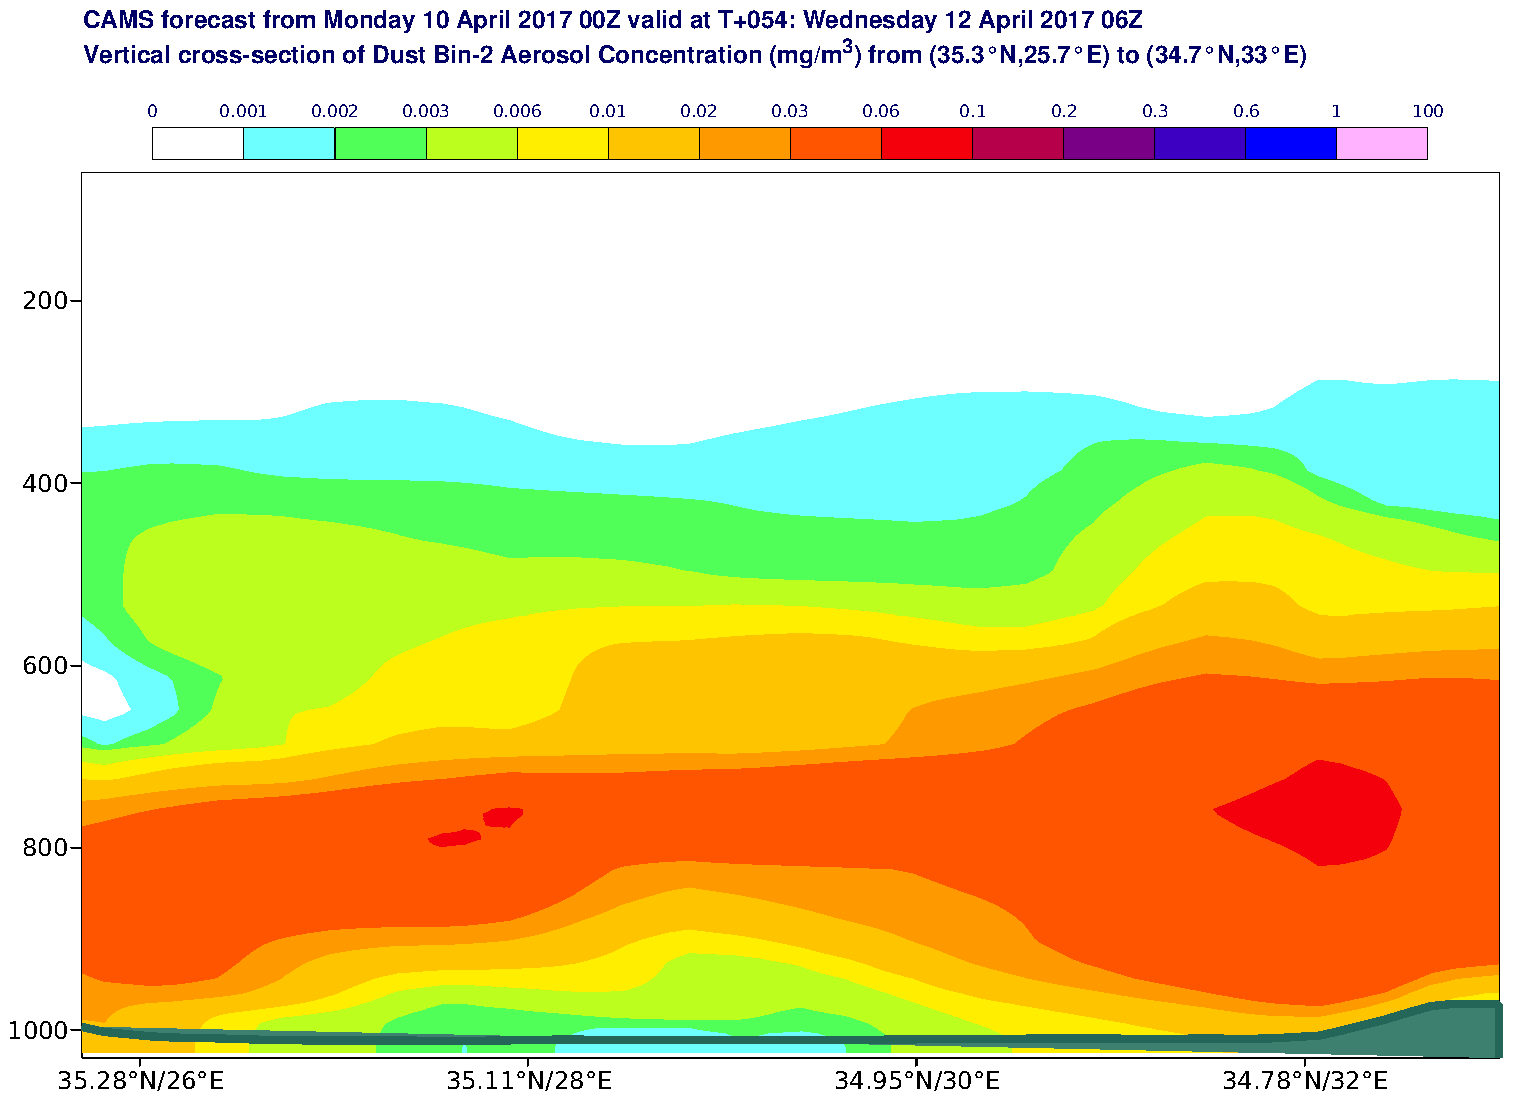 Vertical cross-section of Dust Bin-2 Aerosol Concentration (mg/m3) valid at T54 - 2017-04-12 06:00